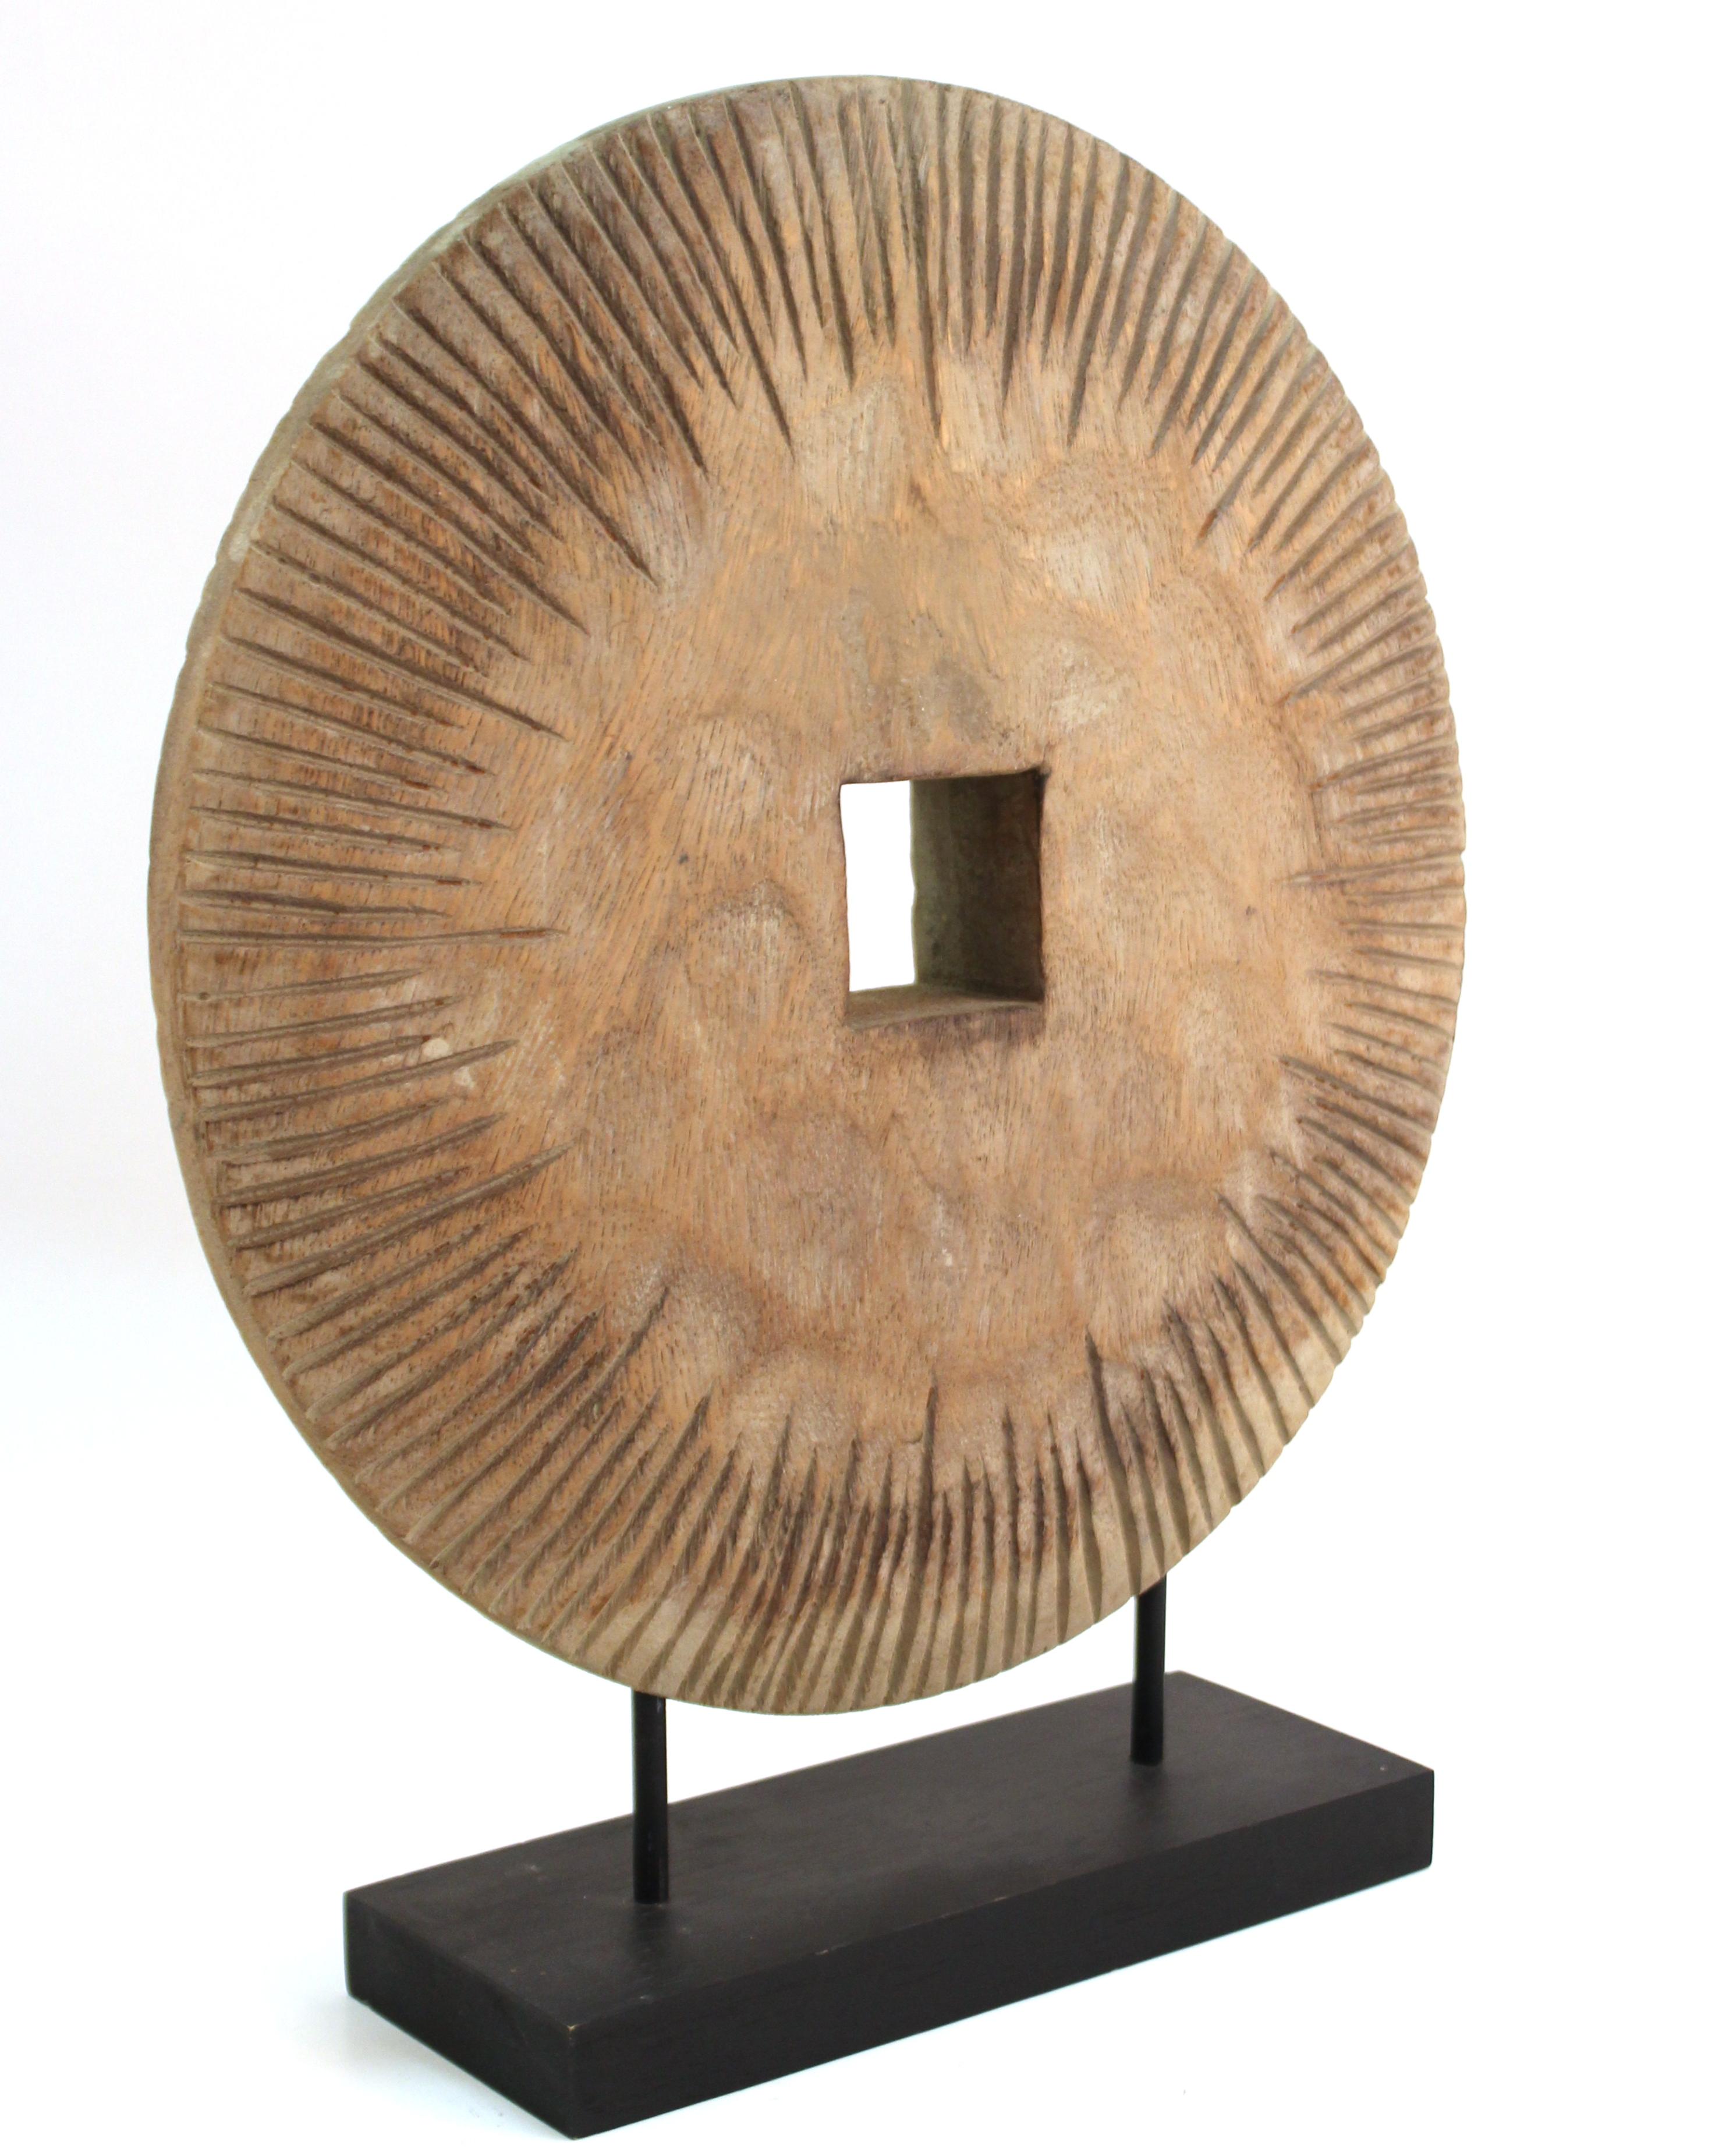 Modern Asian archaic style tabletop sculpture of a wooden carved disc atop a display stand. The piece has a square center hole and carved ridges on the edges. It was likely made during the late 20th century. In great vintage condition with